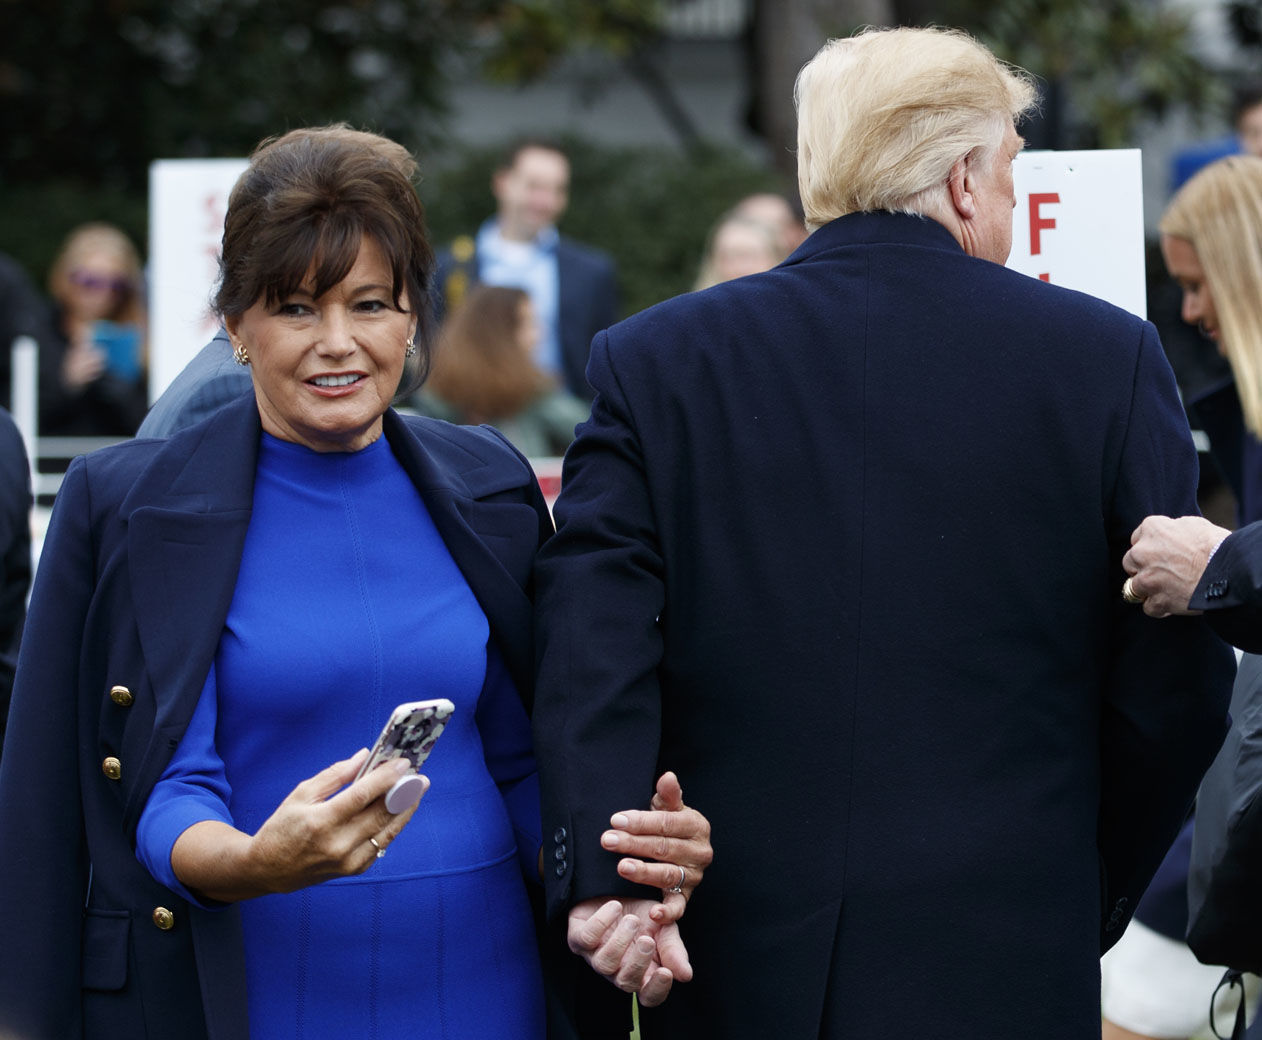 Amalija Knavs, mother of first lady Melania Trump greets President Donald Trump as he walks through the crowd at the White House in Washington, Monday, April 2, 2018, during the annual White House Easter Egg Roll. (AP Photo/Carolyn Kaster)